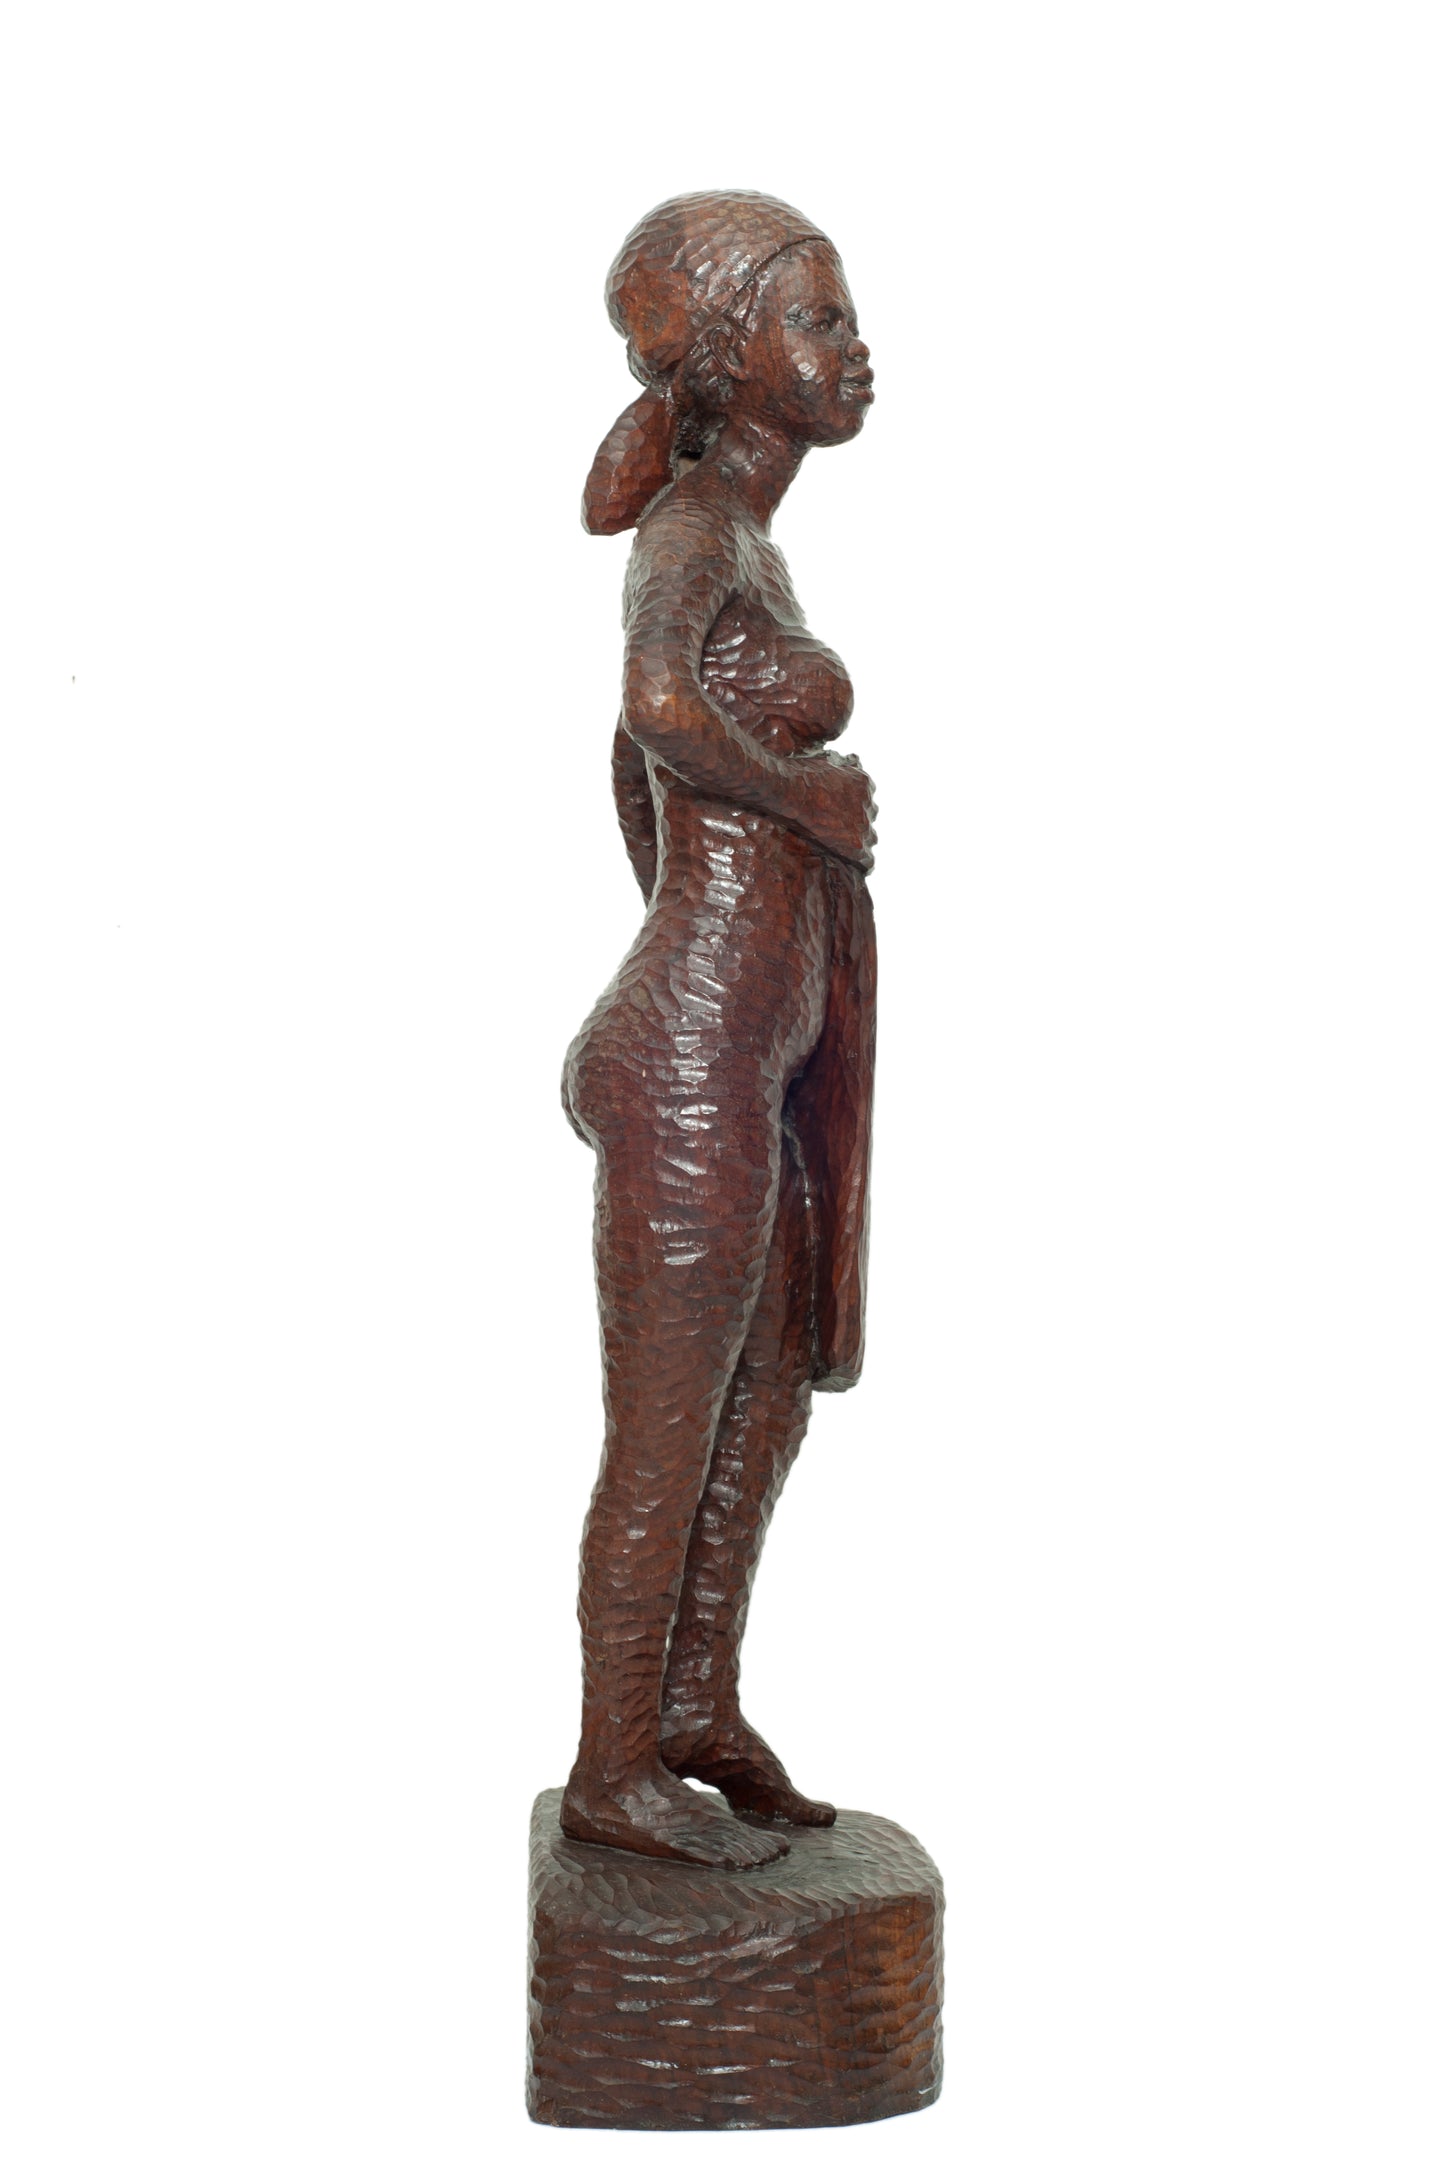 Ludovic Booz (1940-2015) 33"x7"x6'' Woman & Bag Hand-Carved in Mahogany Wood Sculpture #8-3-11GSN- Fondation Marie & Georges S. Nader